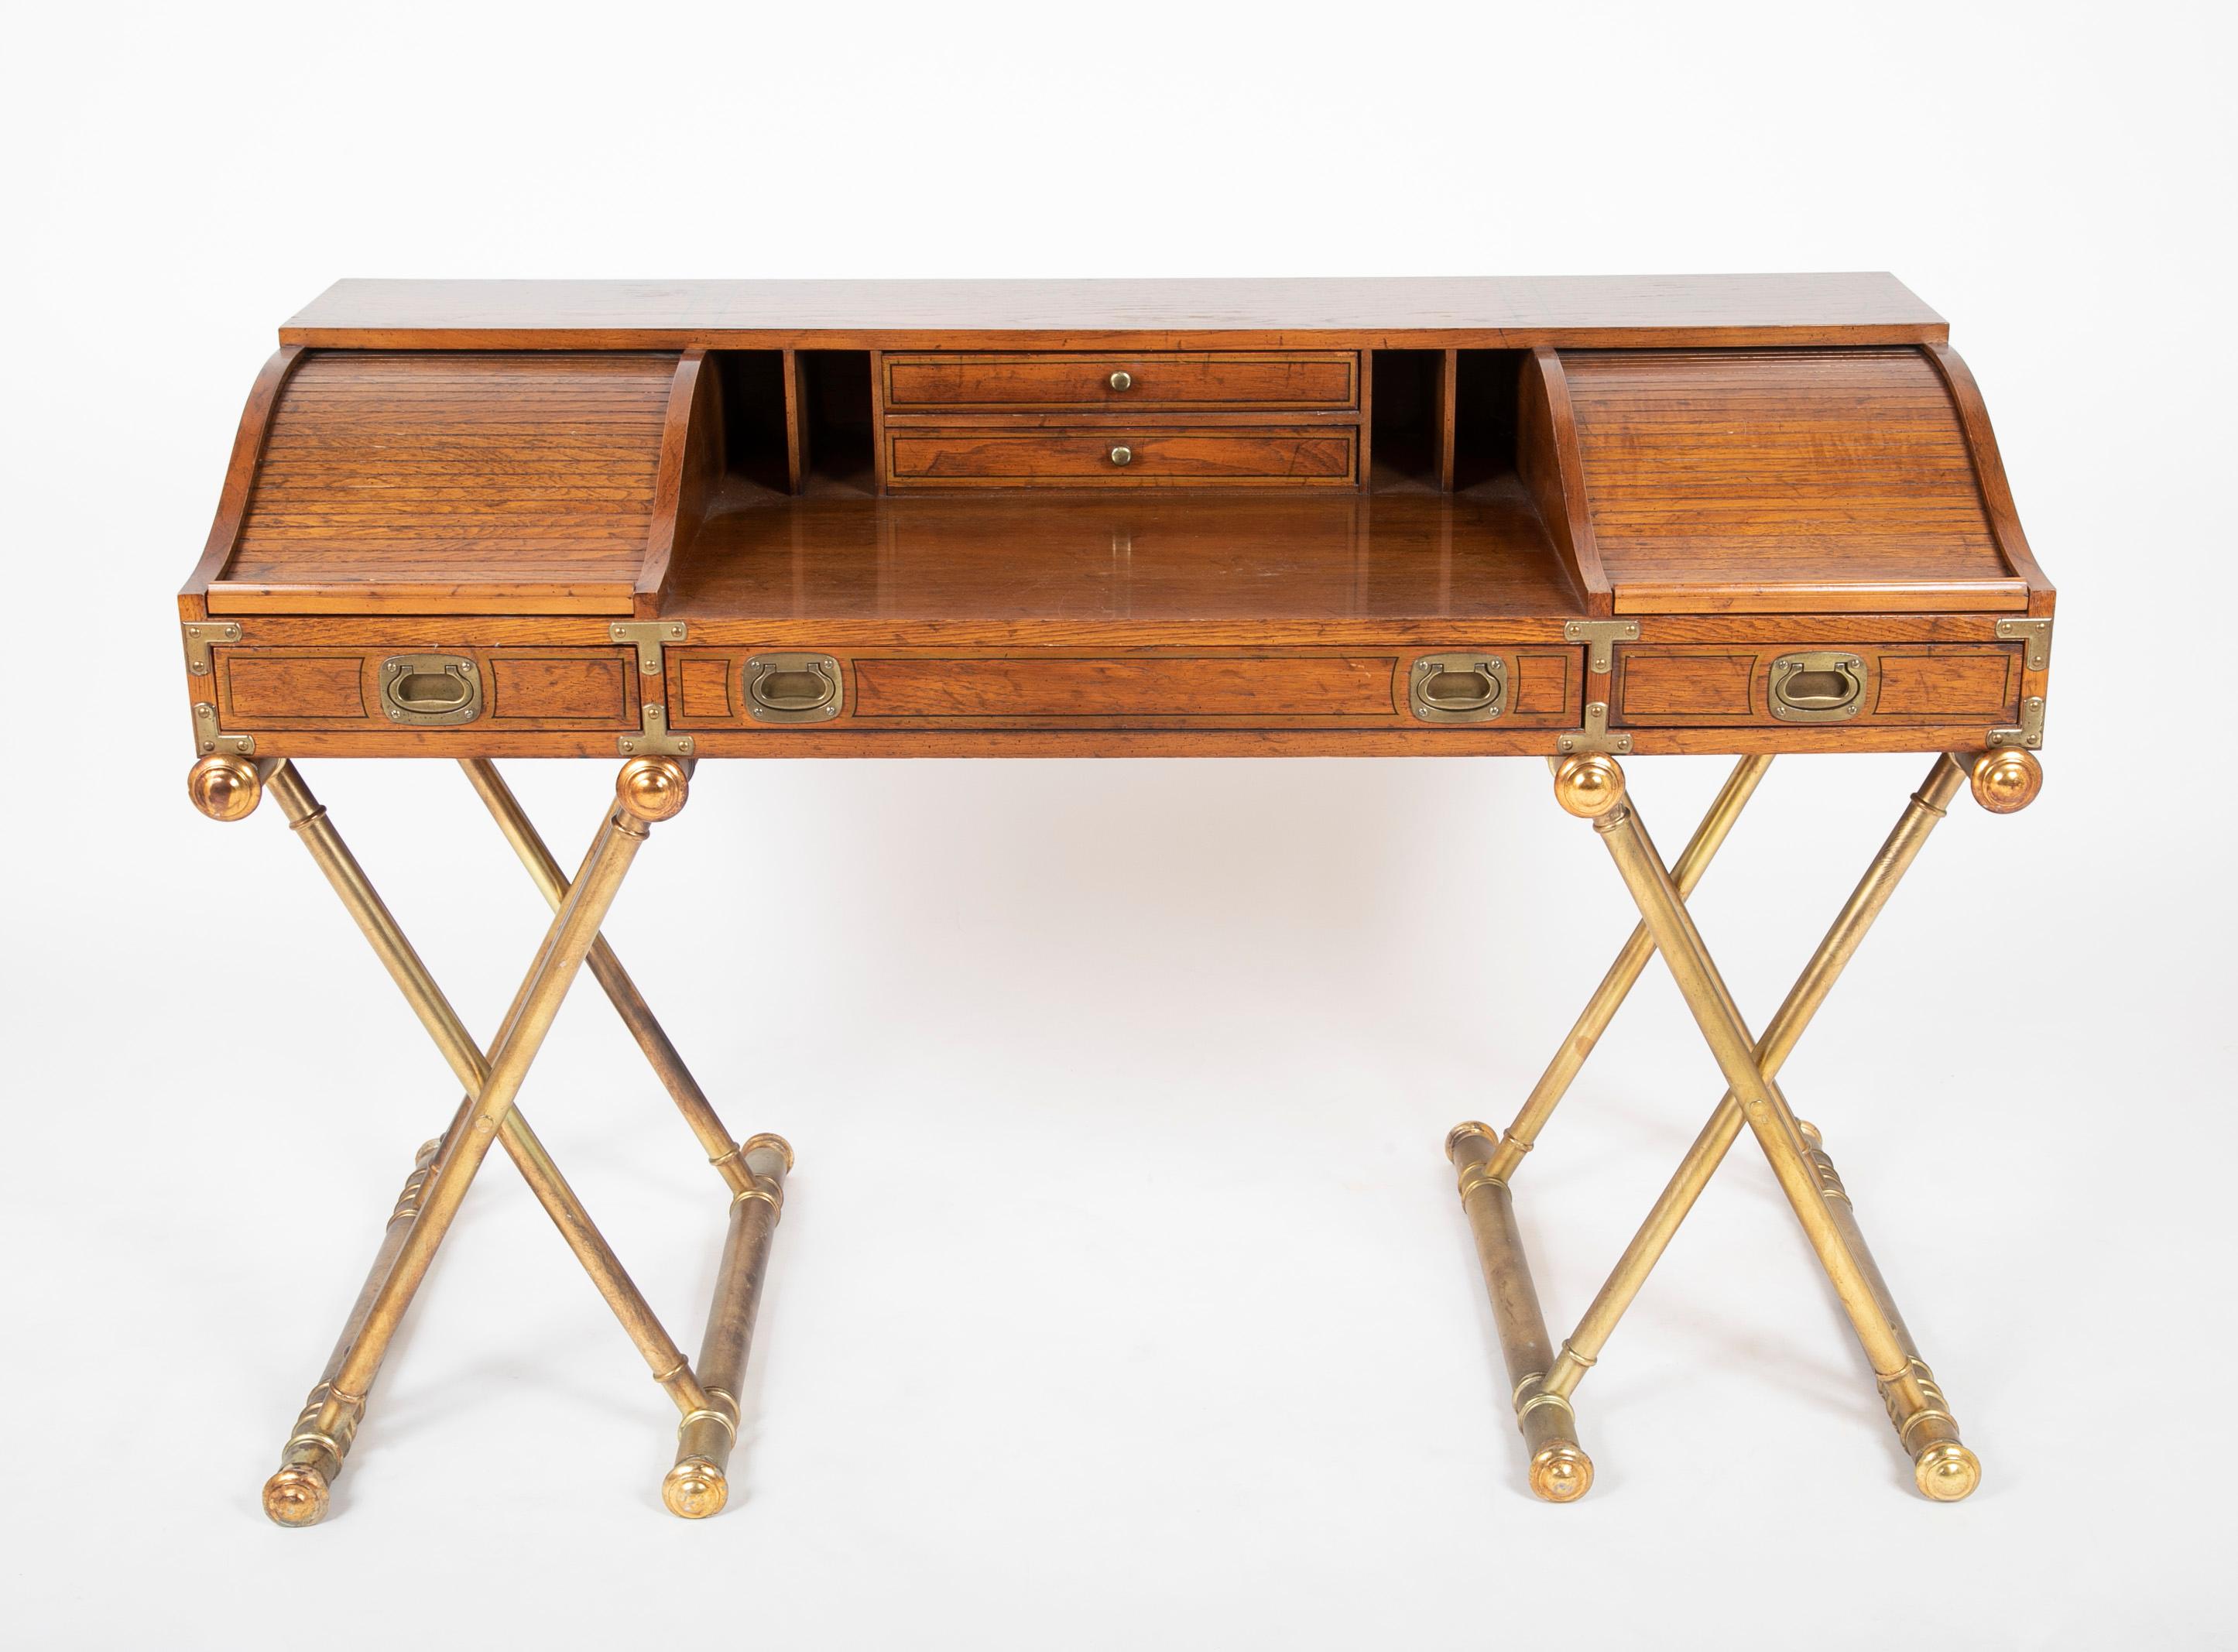 Fabulous vintage Campaign style low roll top desk with gilt X-leg base by Drexel. 
A handsome desk by Drexel, done in Campaign style with low roll tops or tambour doors on each side of the desk top which sits on a gilded X-base. It is a good sized